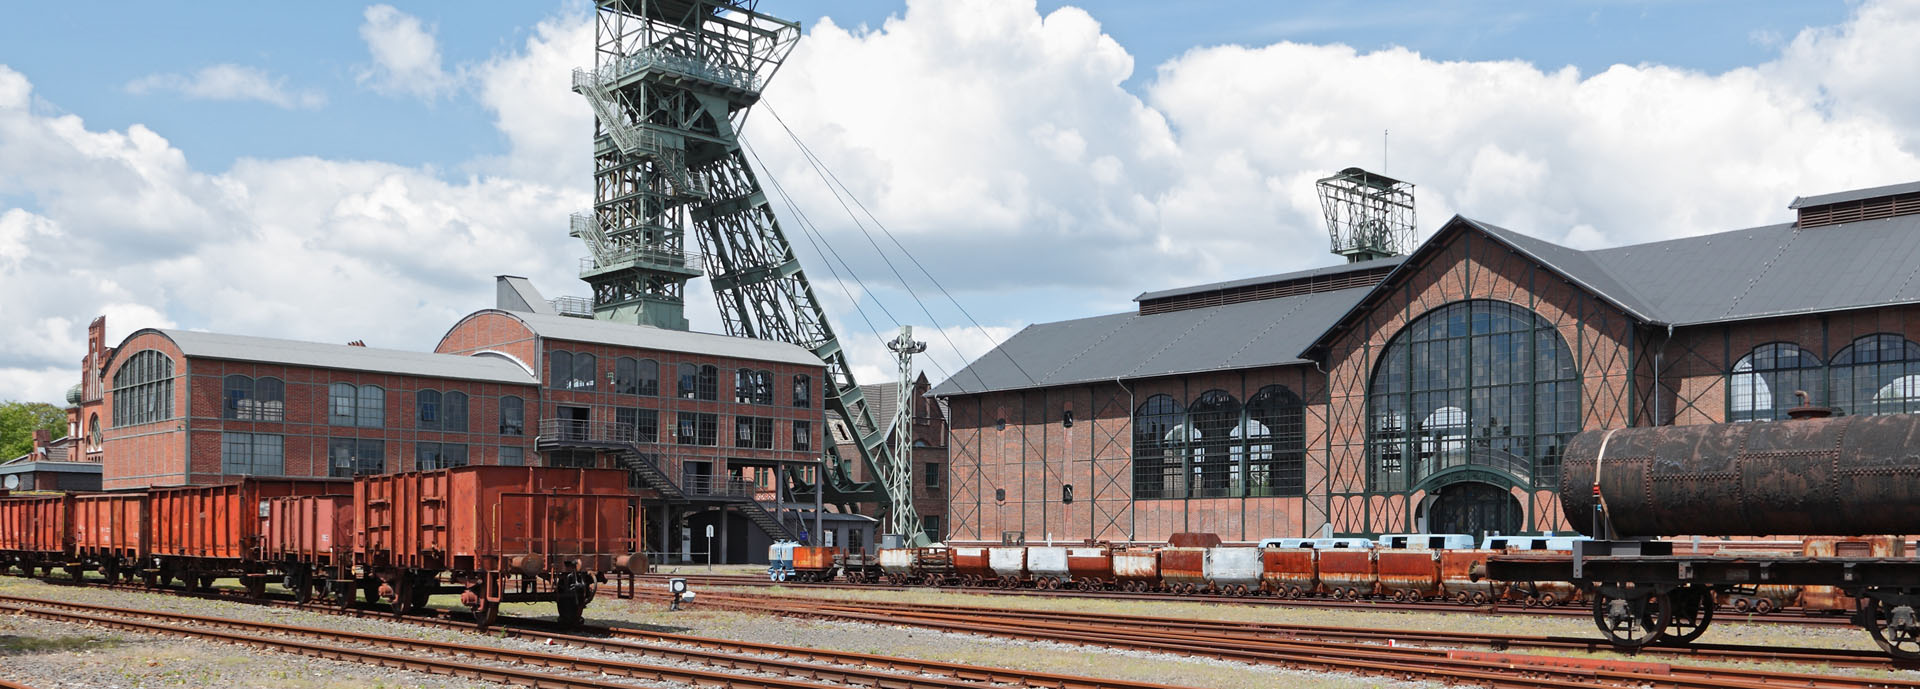 From coal to culture: re-thinking the mining heritage of the Ruhr area